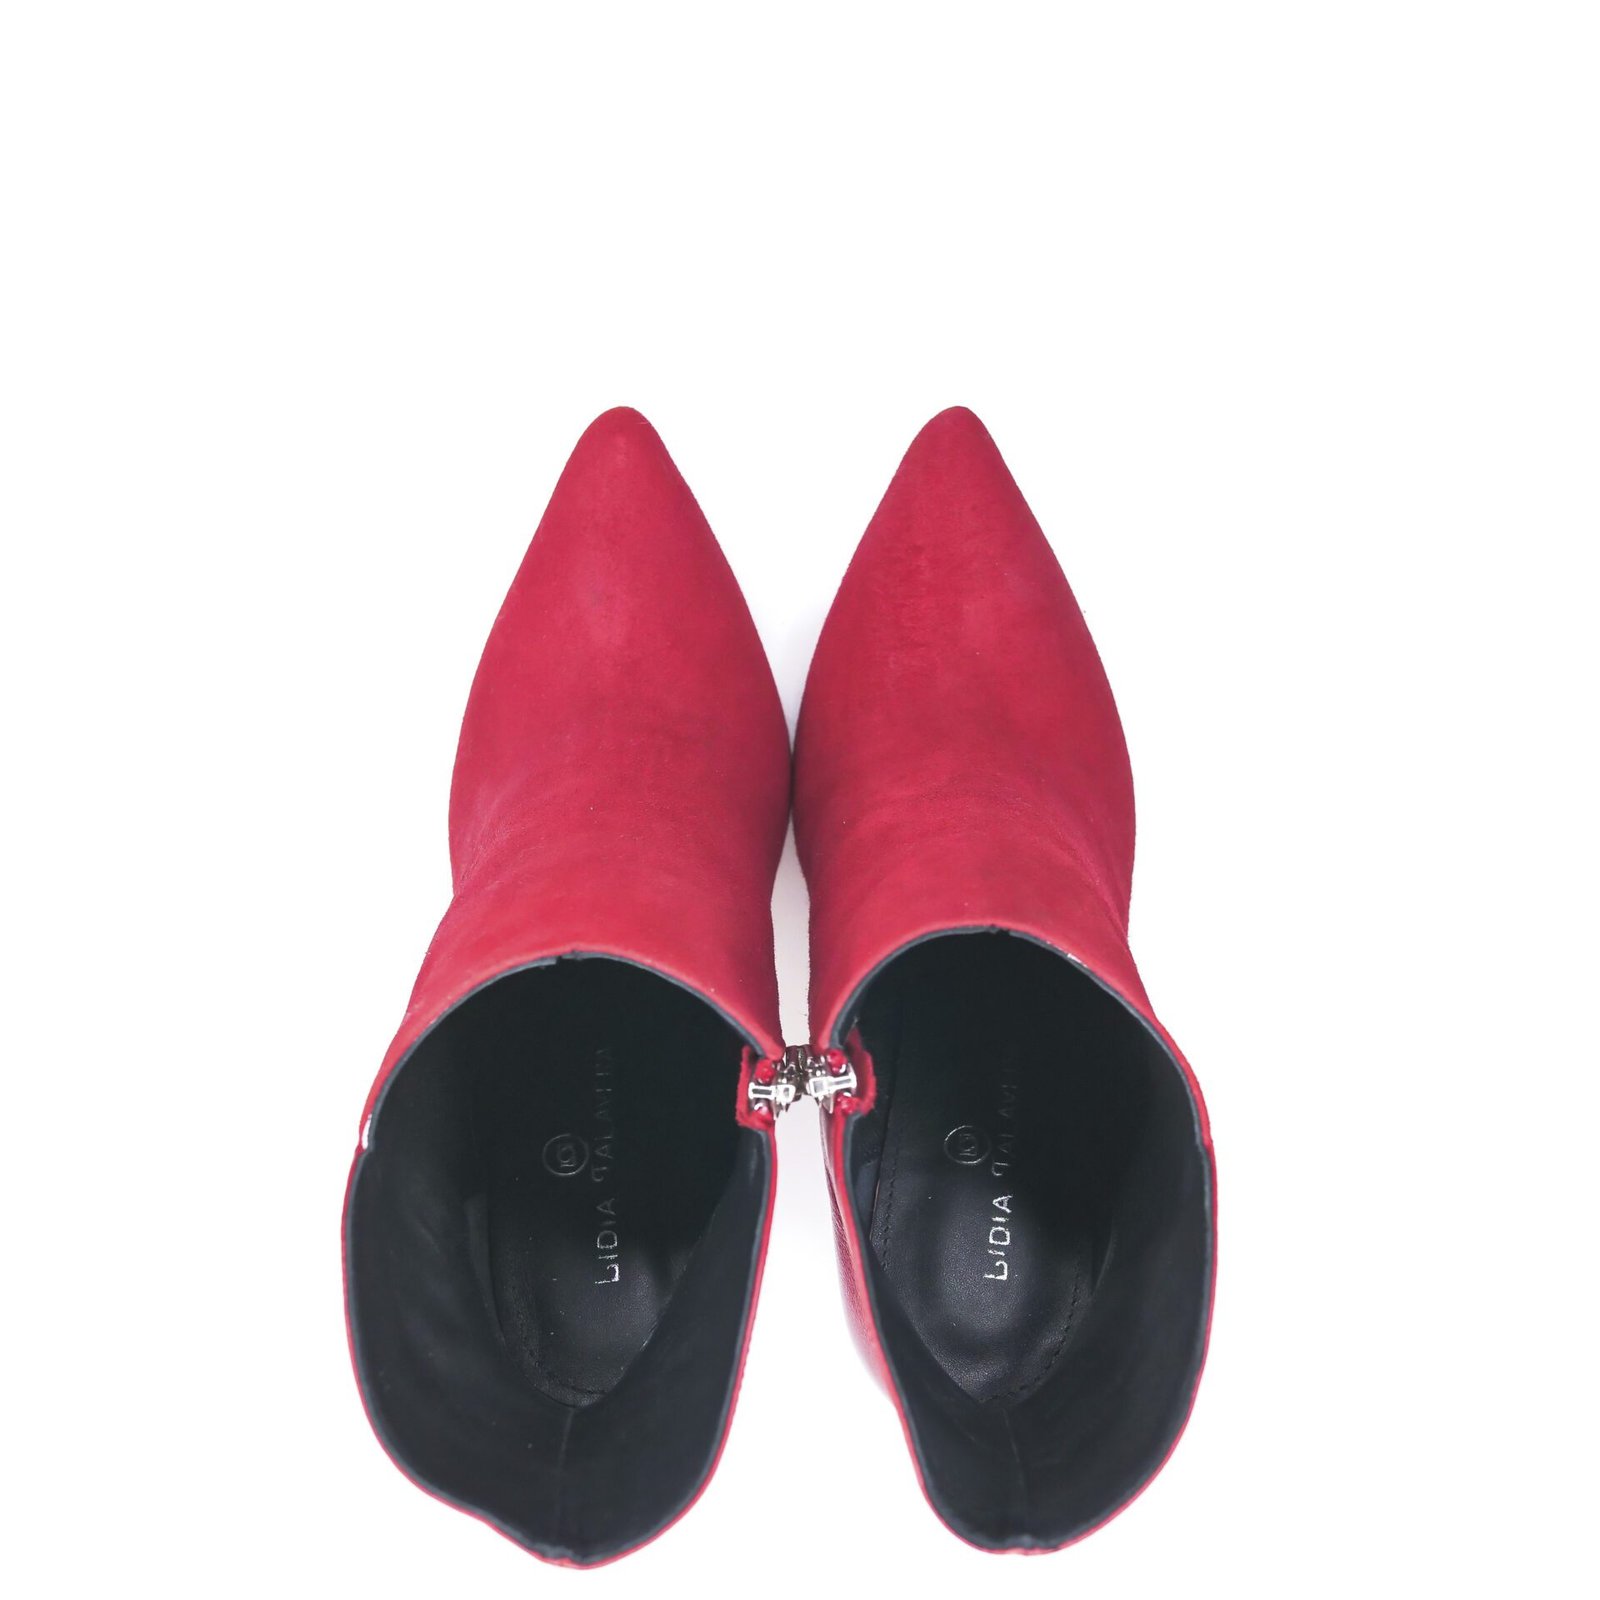 red pointed-toe boot high heel for men & women